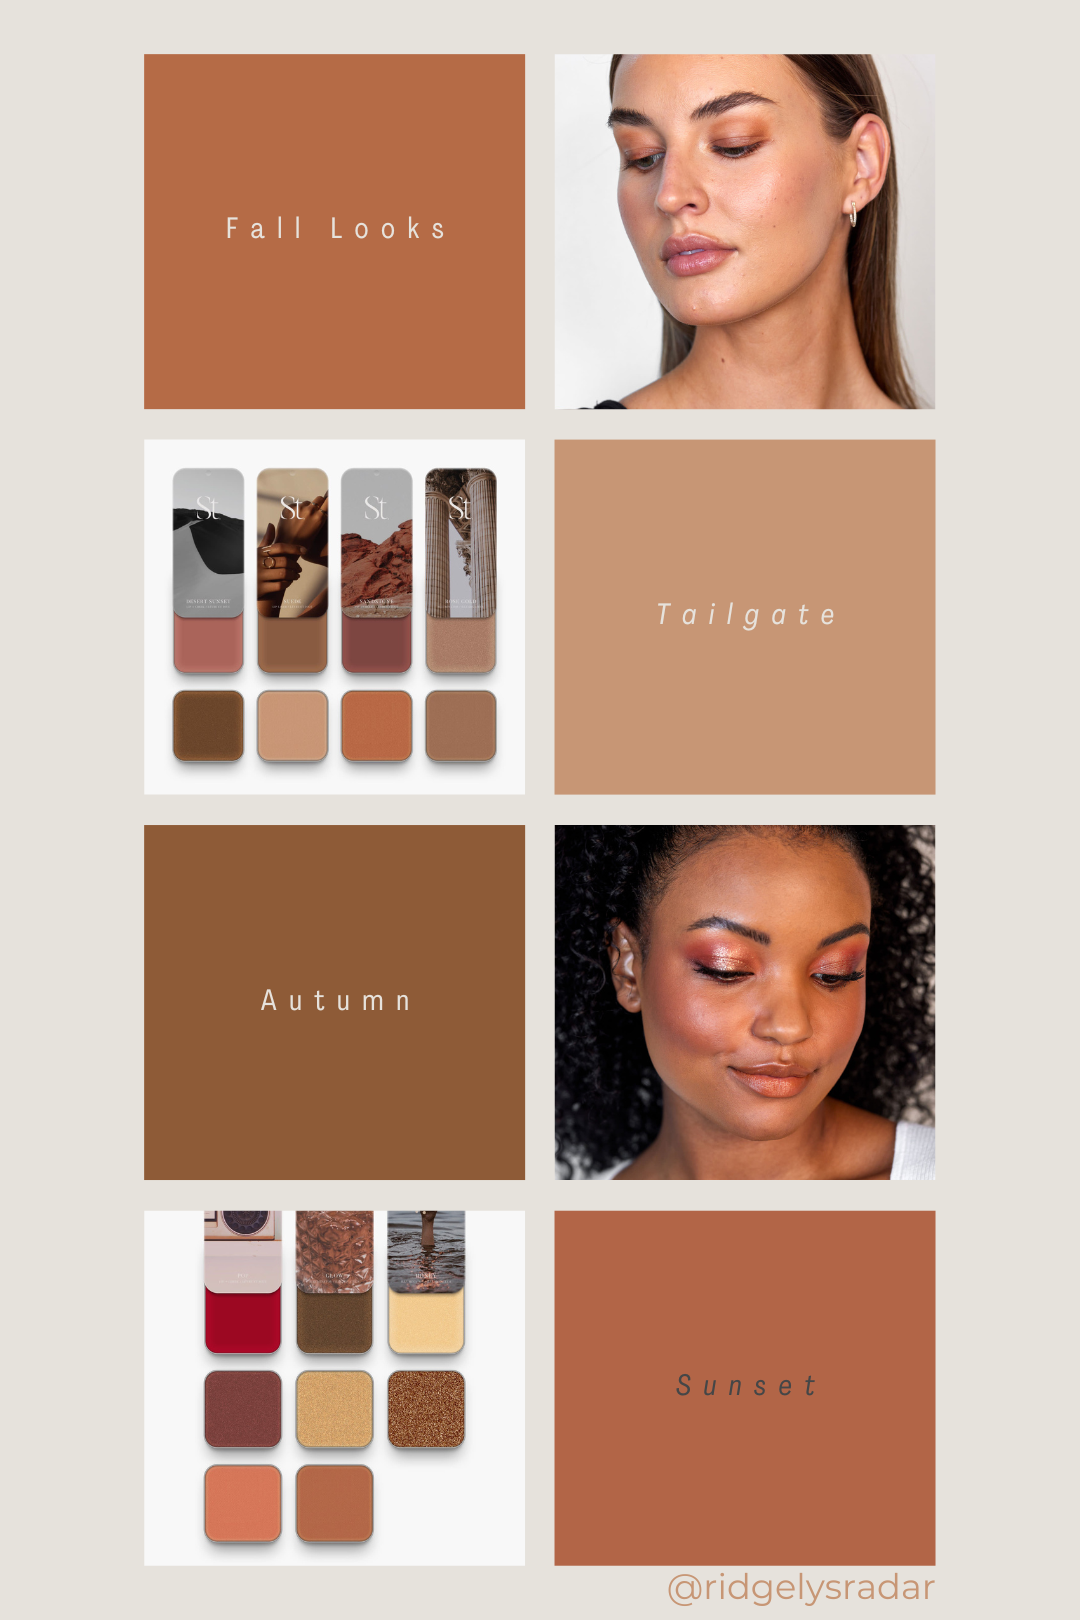 Change up your makeup for Fall with these four looks with colors inspired from the season from burnt oranges, soft greens, and golden shimmer.